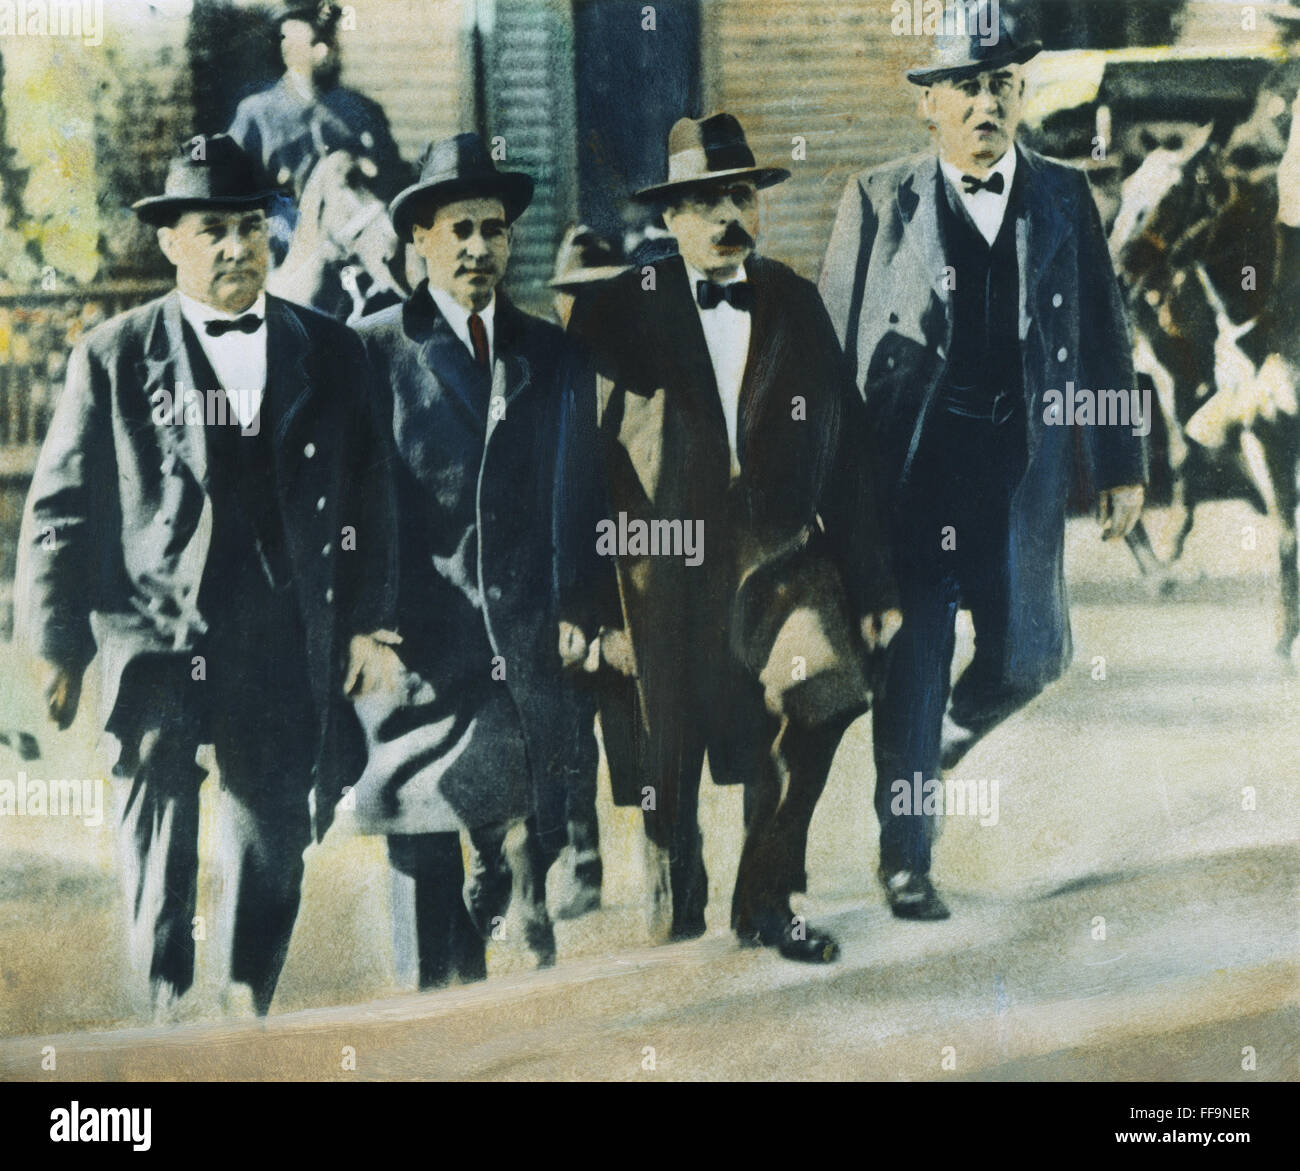 SACCO & VANZETTI, 1921. /nFlanked by Massachusetts deputy sheriffs, Nicola Sacco (second from left) and Bartolomeo Vanzetti enter the Norfolk County courthouse at Dedham, 1921. Stock Photo